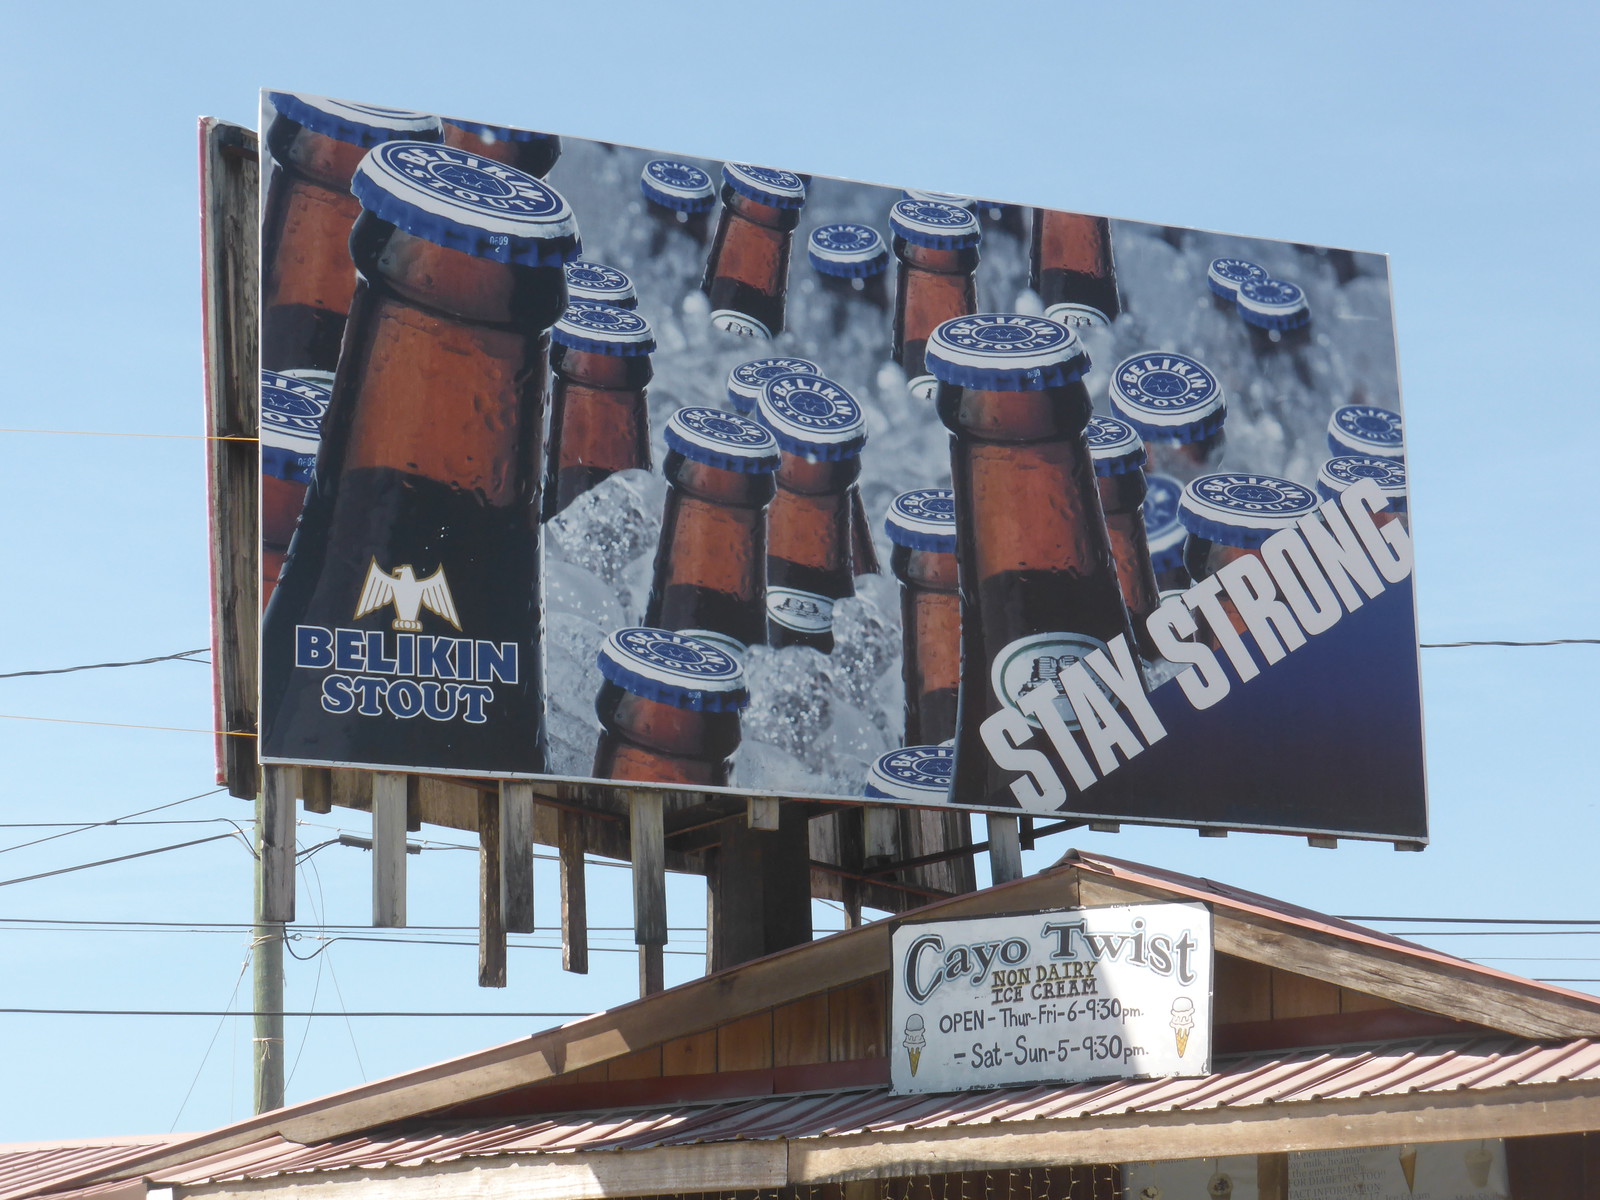 A Belikin Stout advertising sign